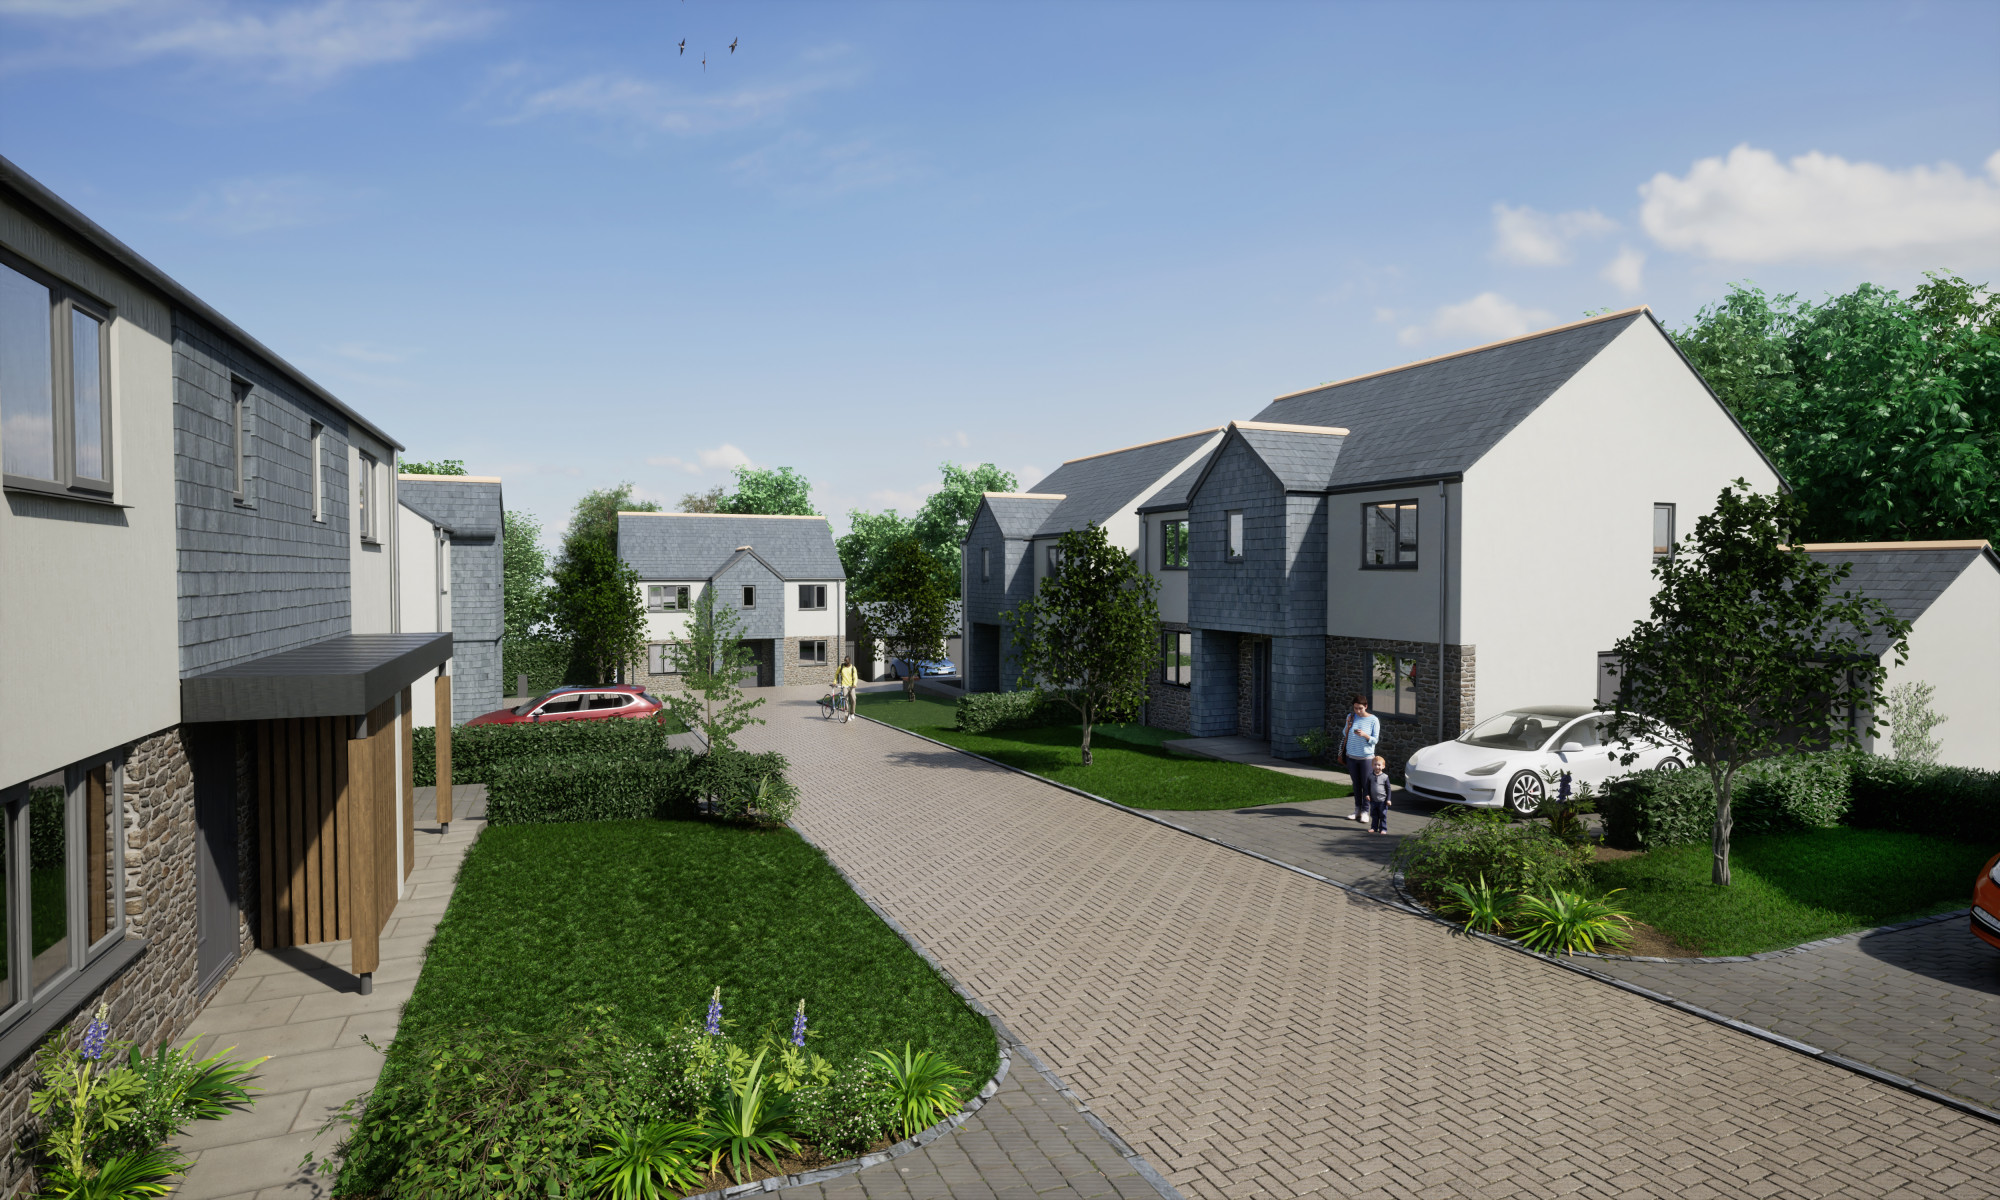 3 bed Development For Sale in Goonhavern,  - thumb 1